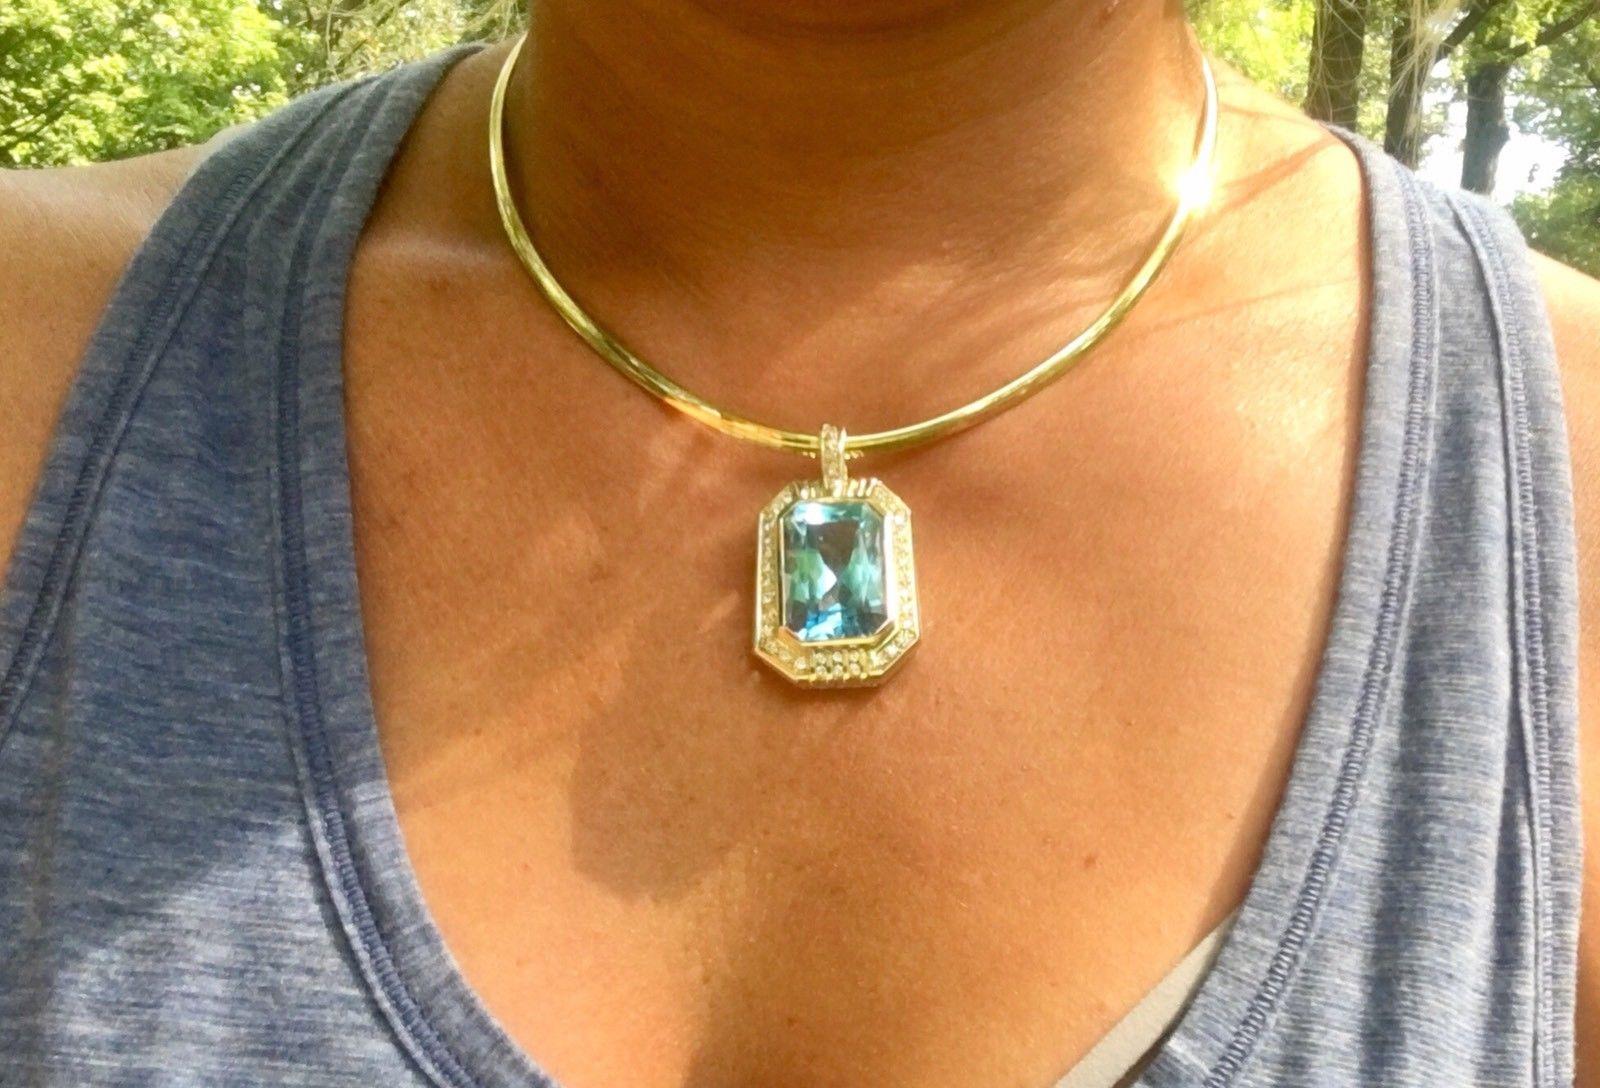 14 Karat Gold 20 Carat Blue Topaz VS Diamond Necklace Pendant In Excellent Condition For Sale In Shaker Heights, OH